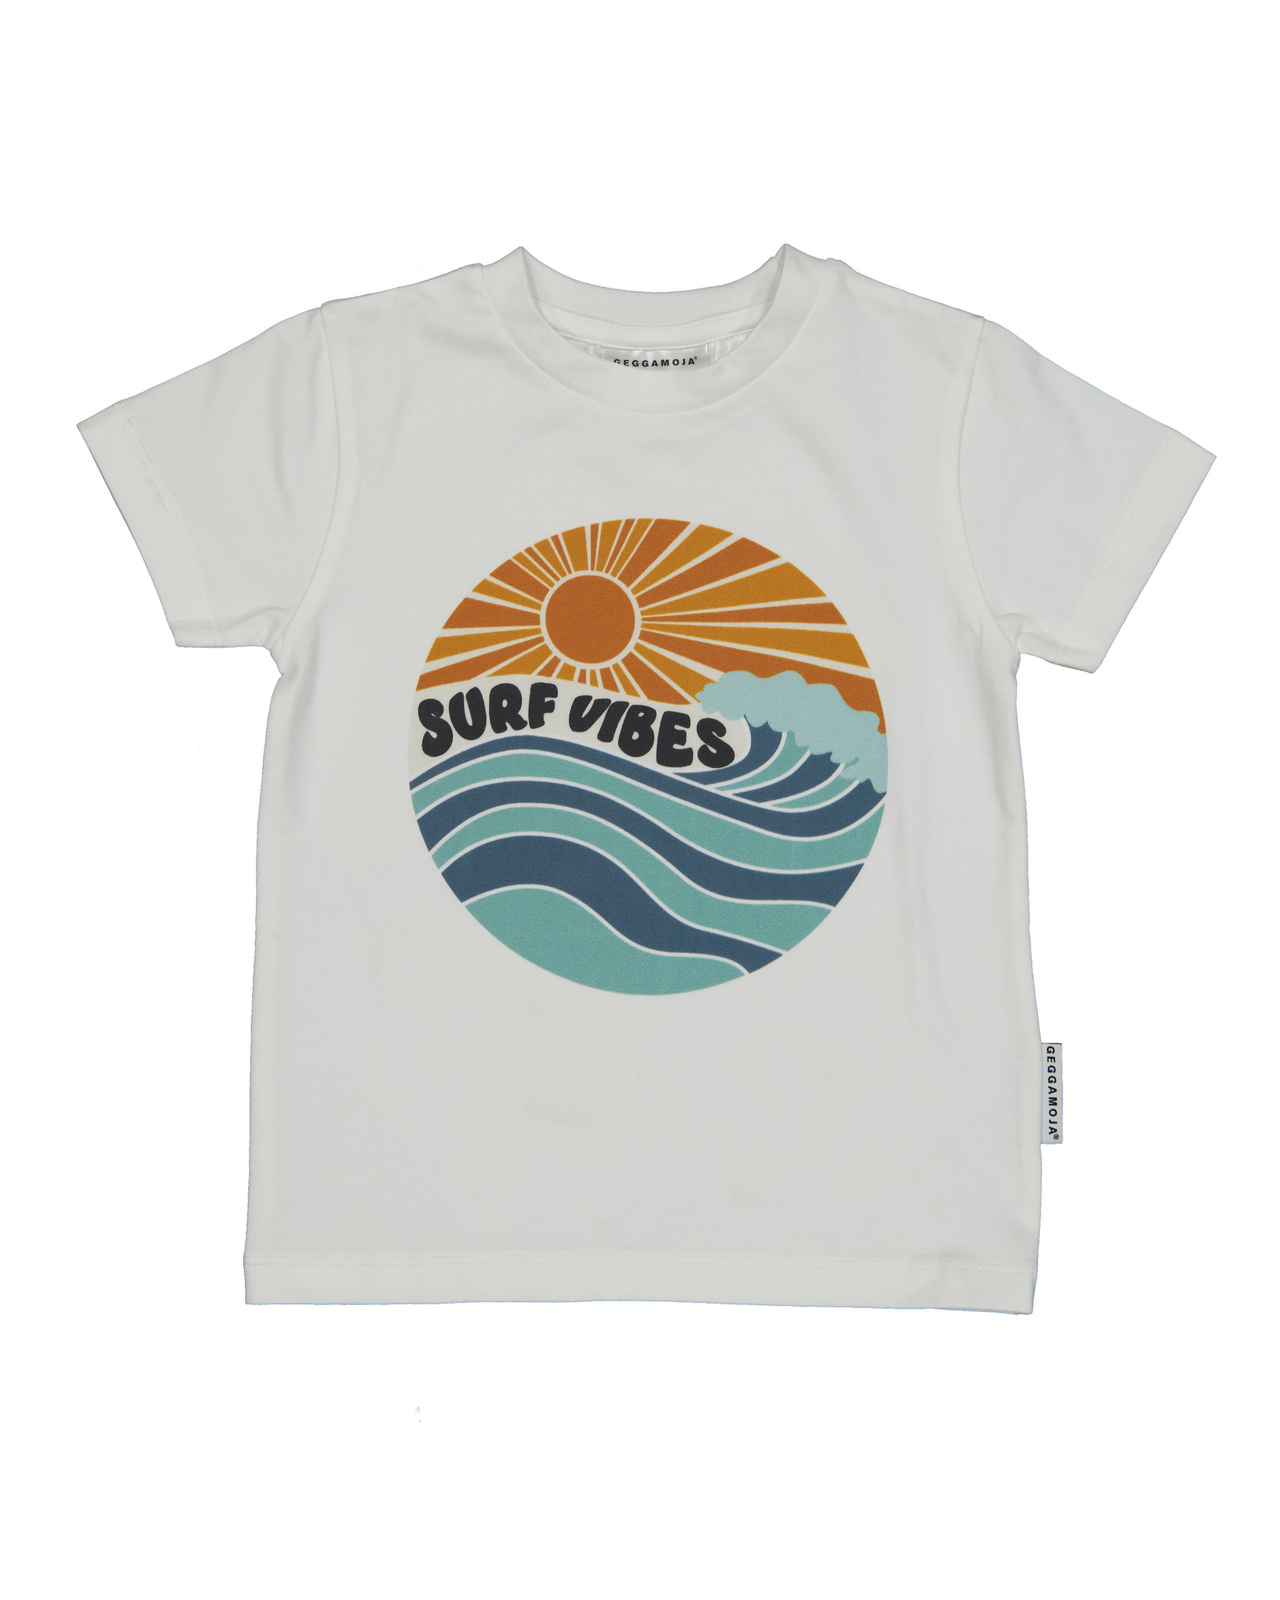 T-shirt Surf vibes Offwhite 98/104